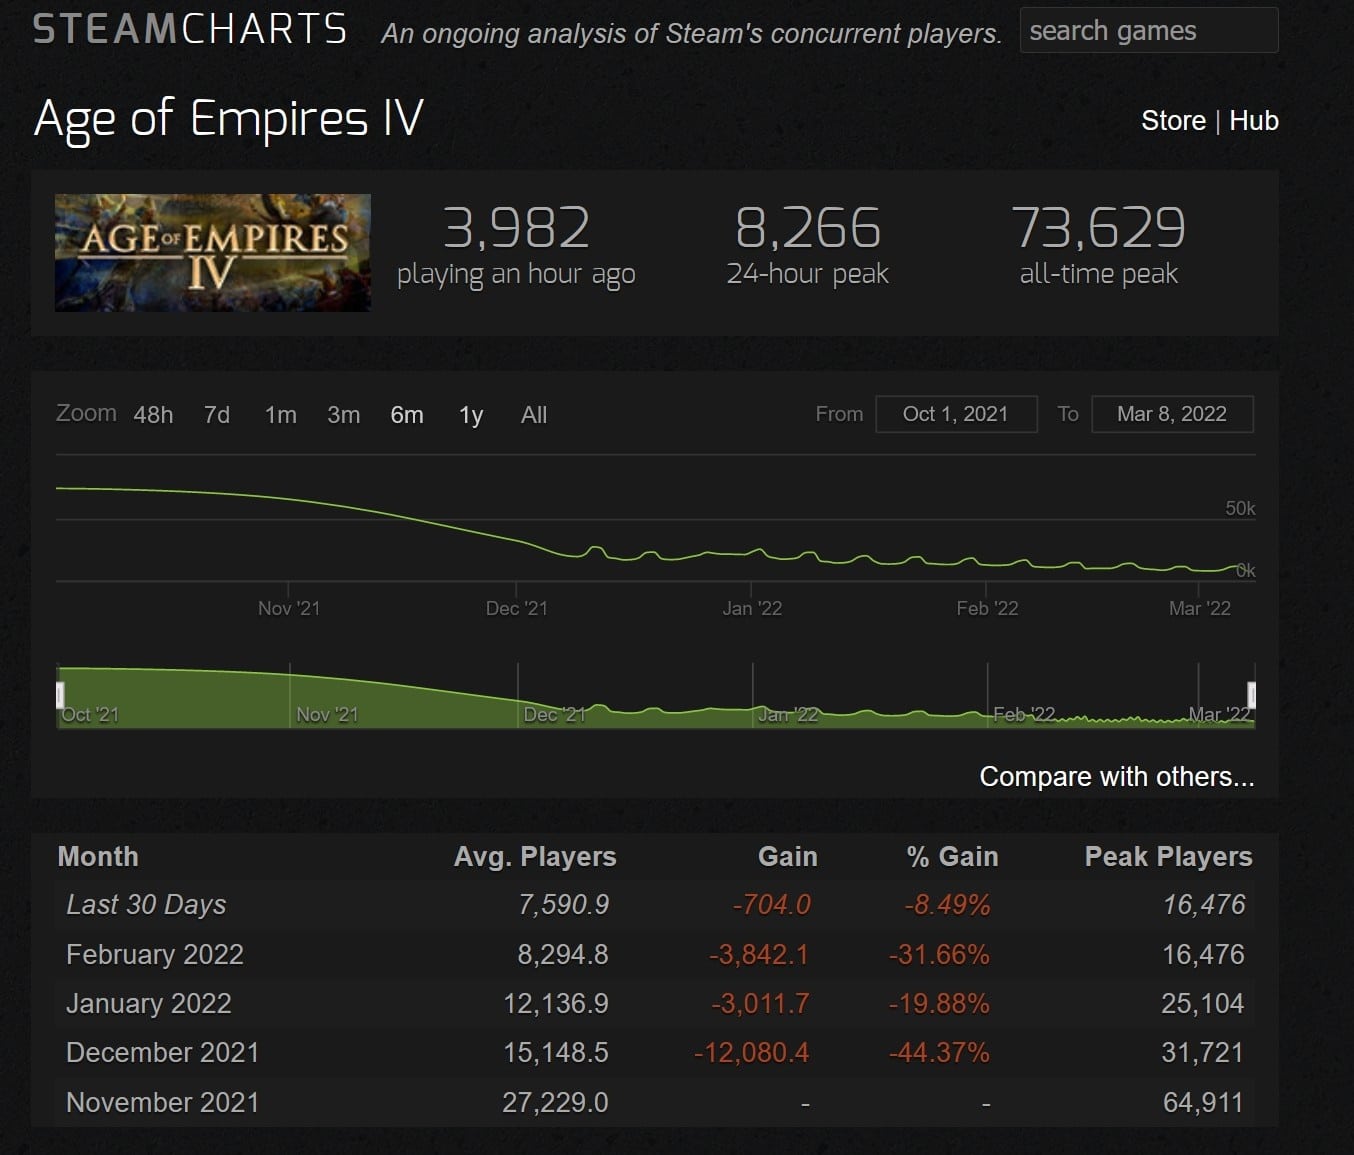 These statistics of Age of Empires 4 player numbers speak volumes.